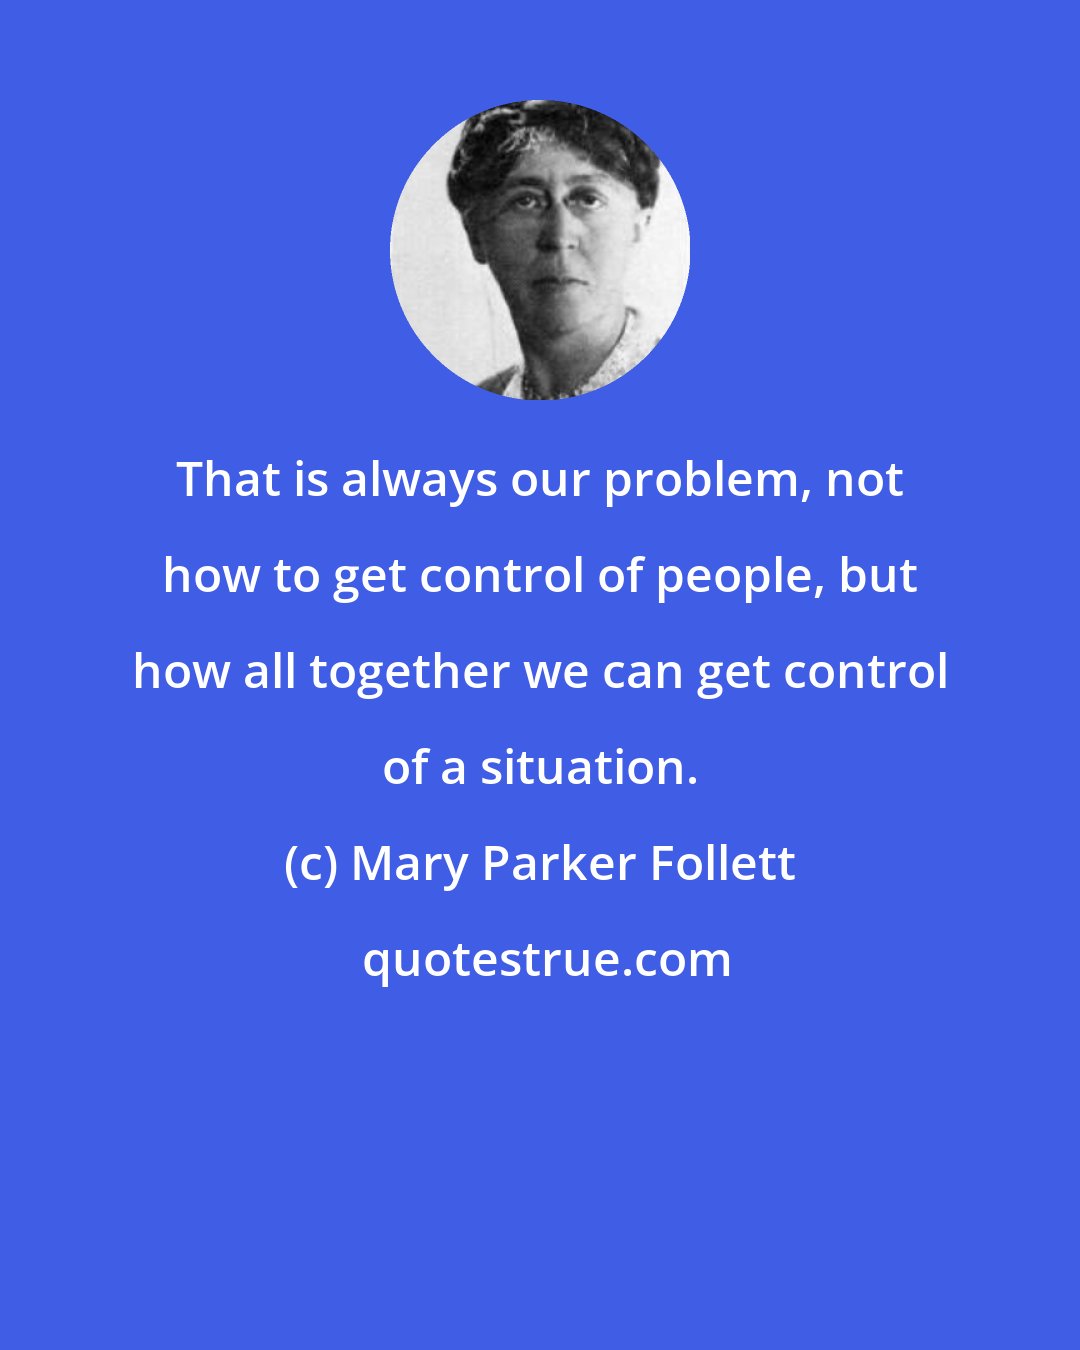 Mary Parker Follett: That is always our problem, not how to get control of people, but how all together we can get control of a situation.